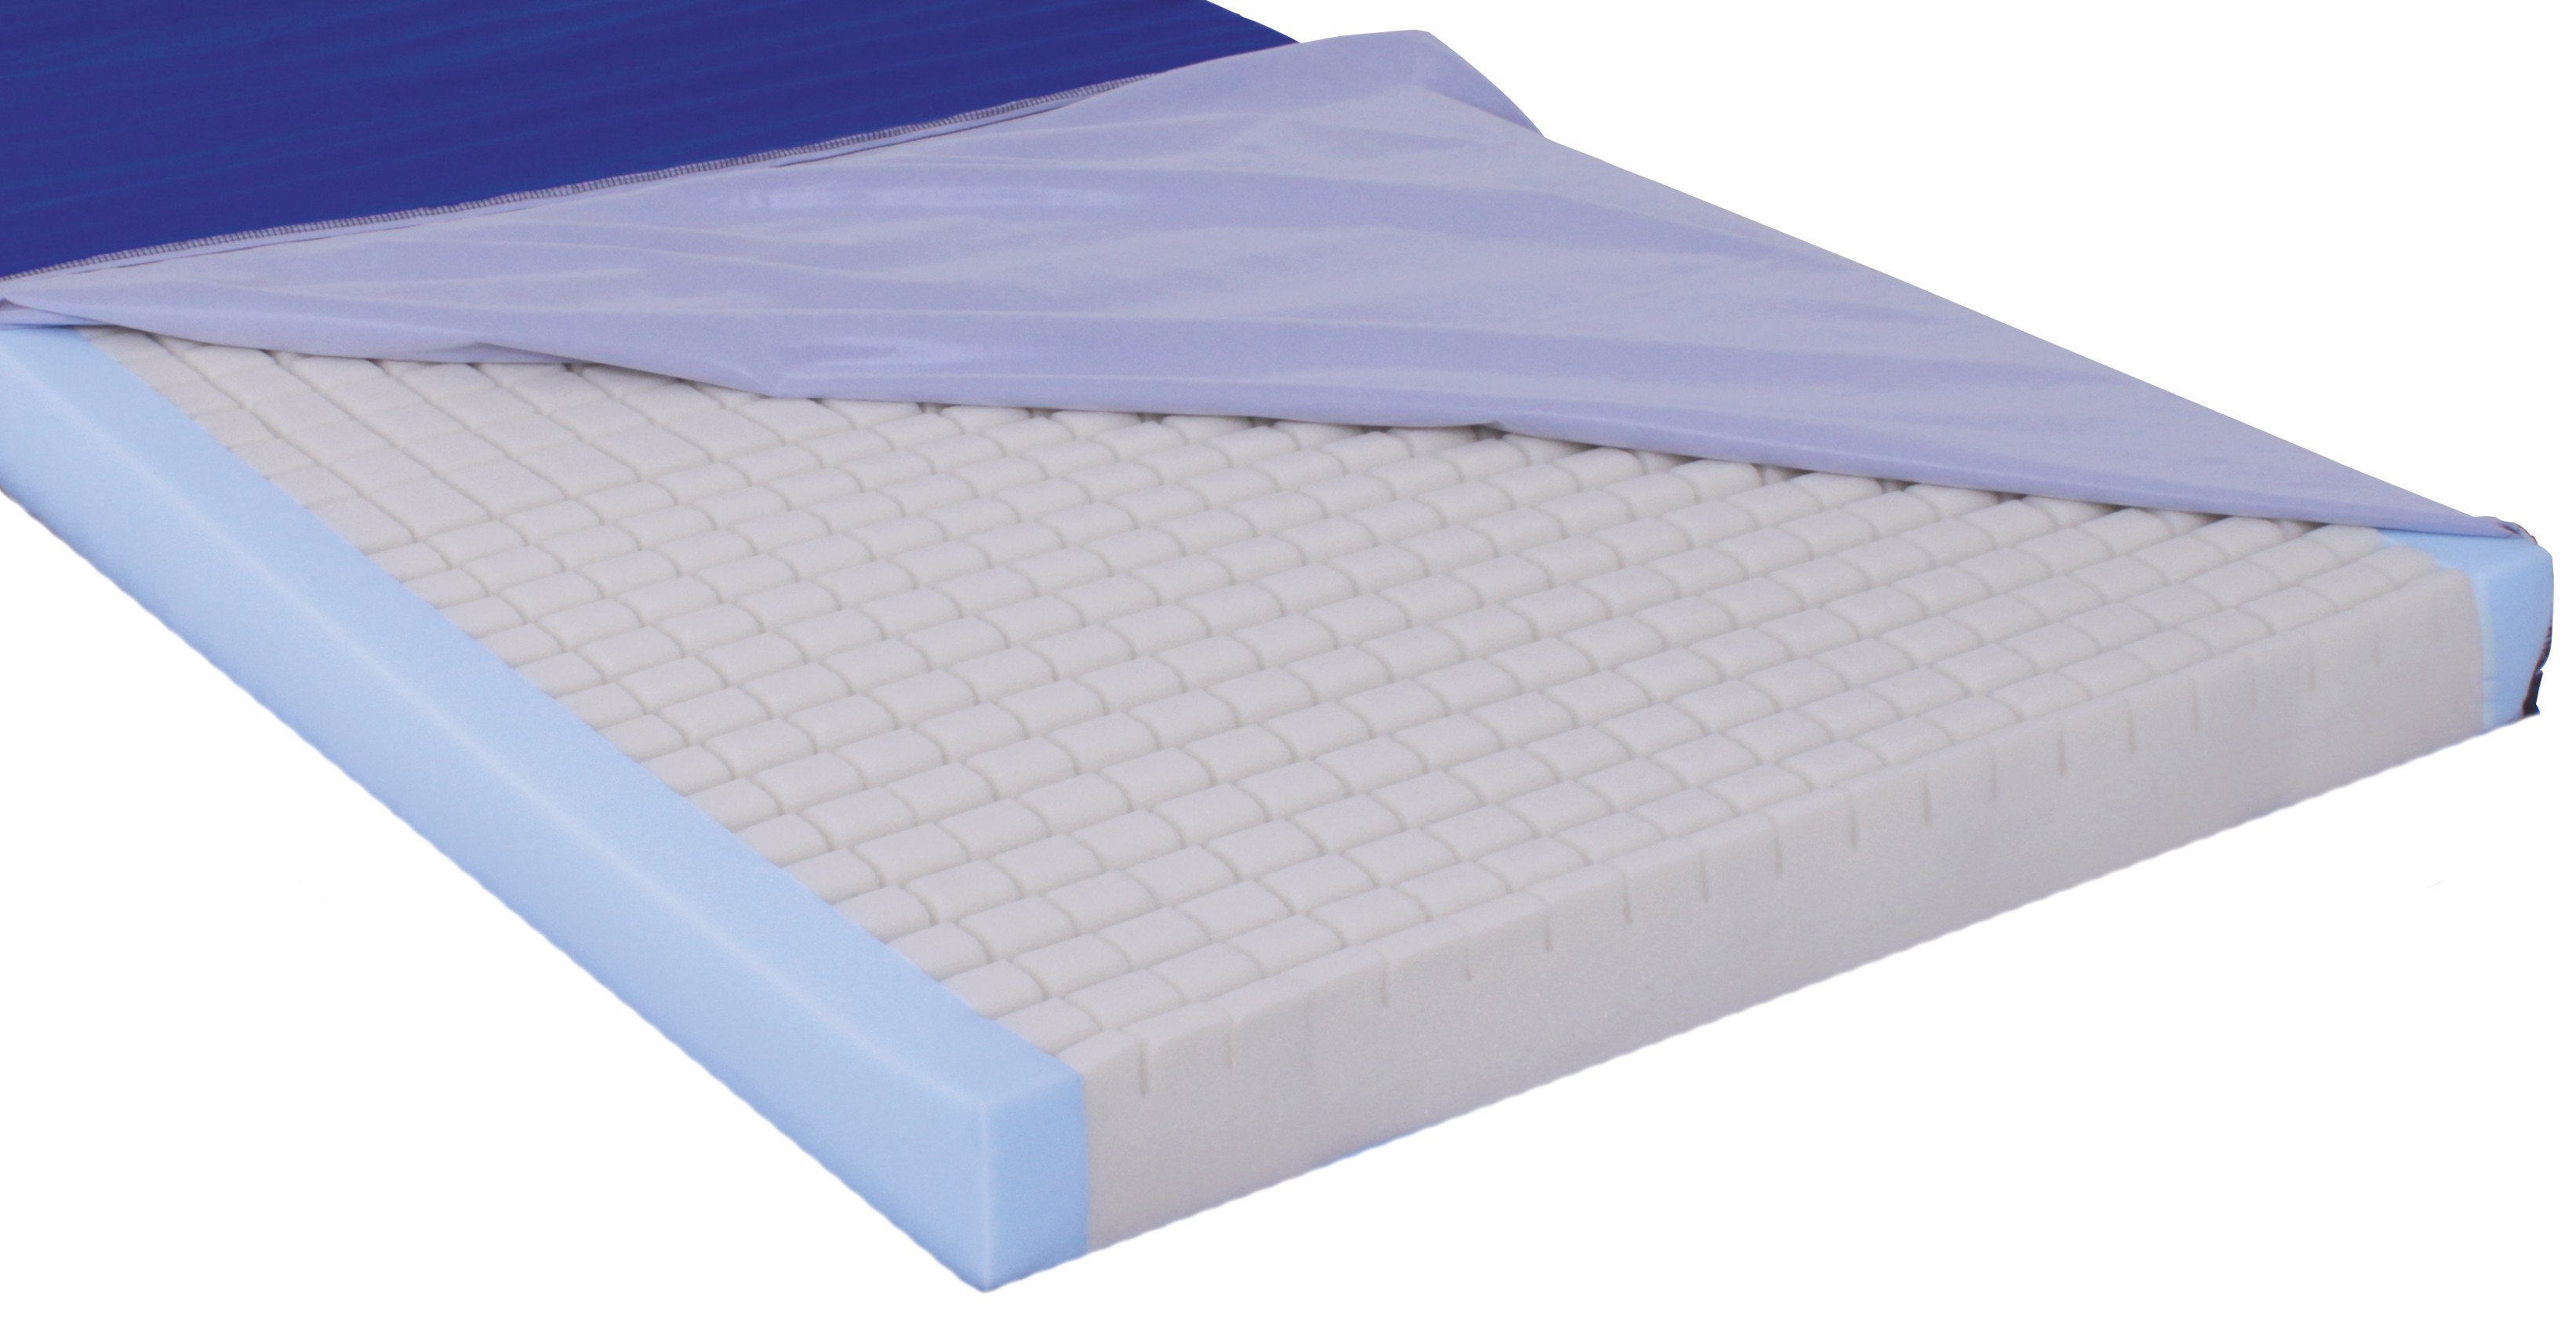 Medi Flex Mattress - Single with Two Way Stretch Waterproof Cover 1980mm x 880mm x 150mm image 1